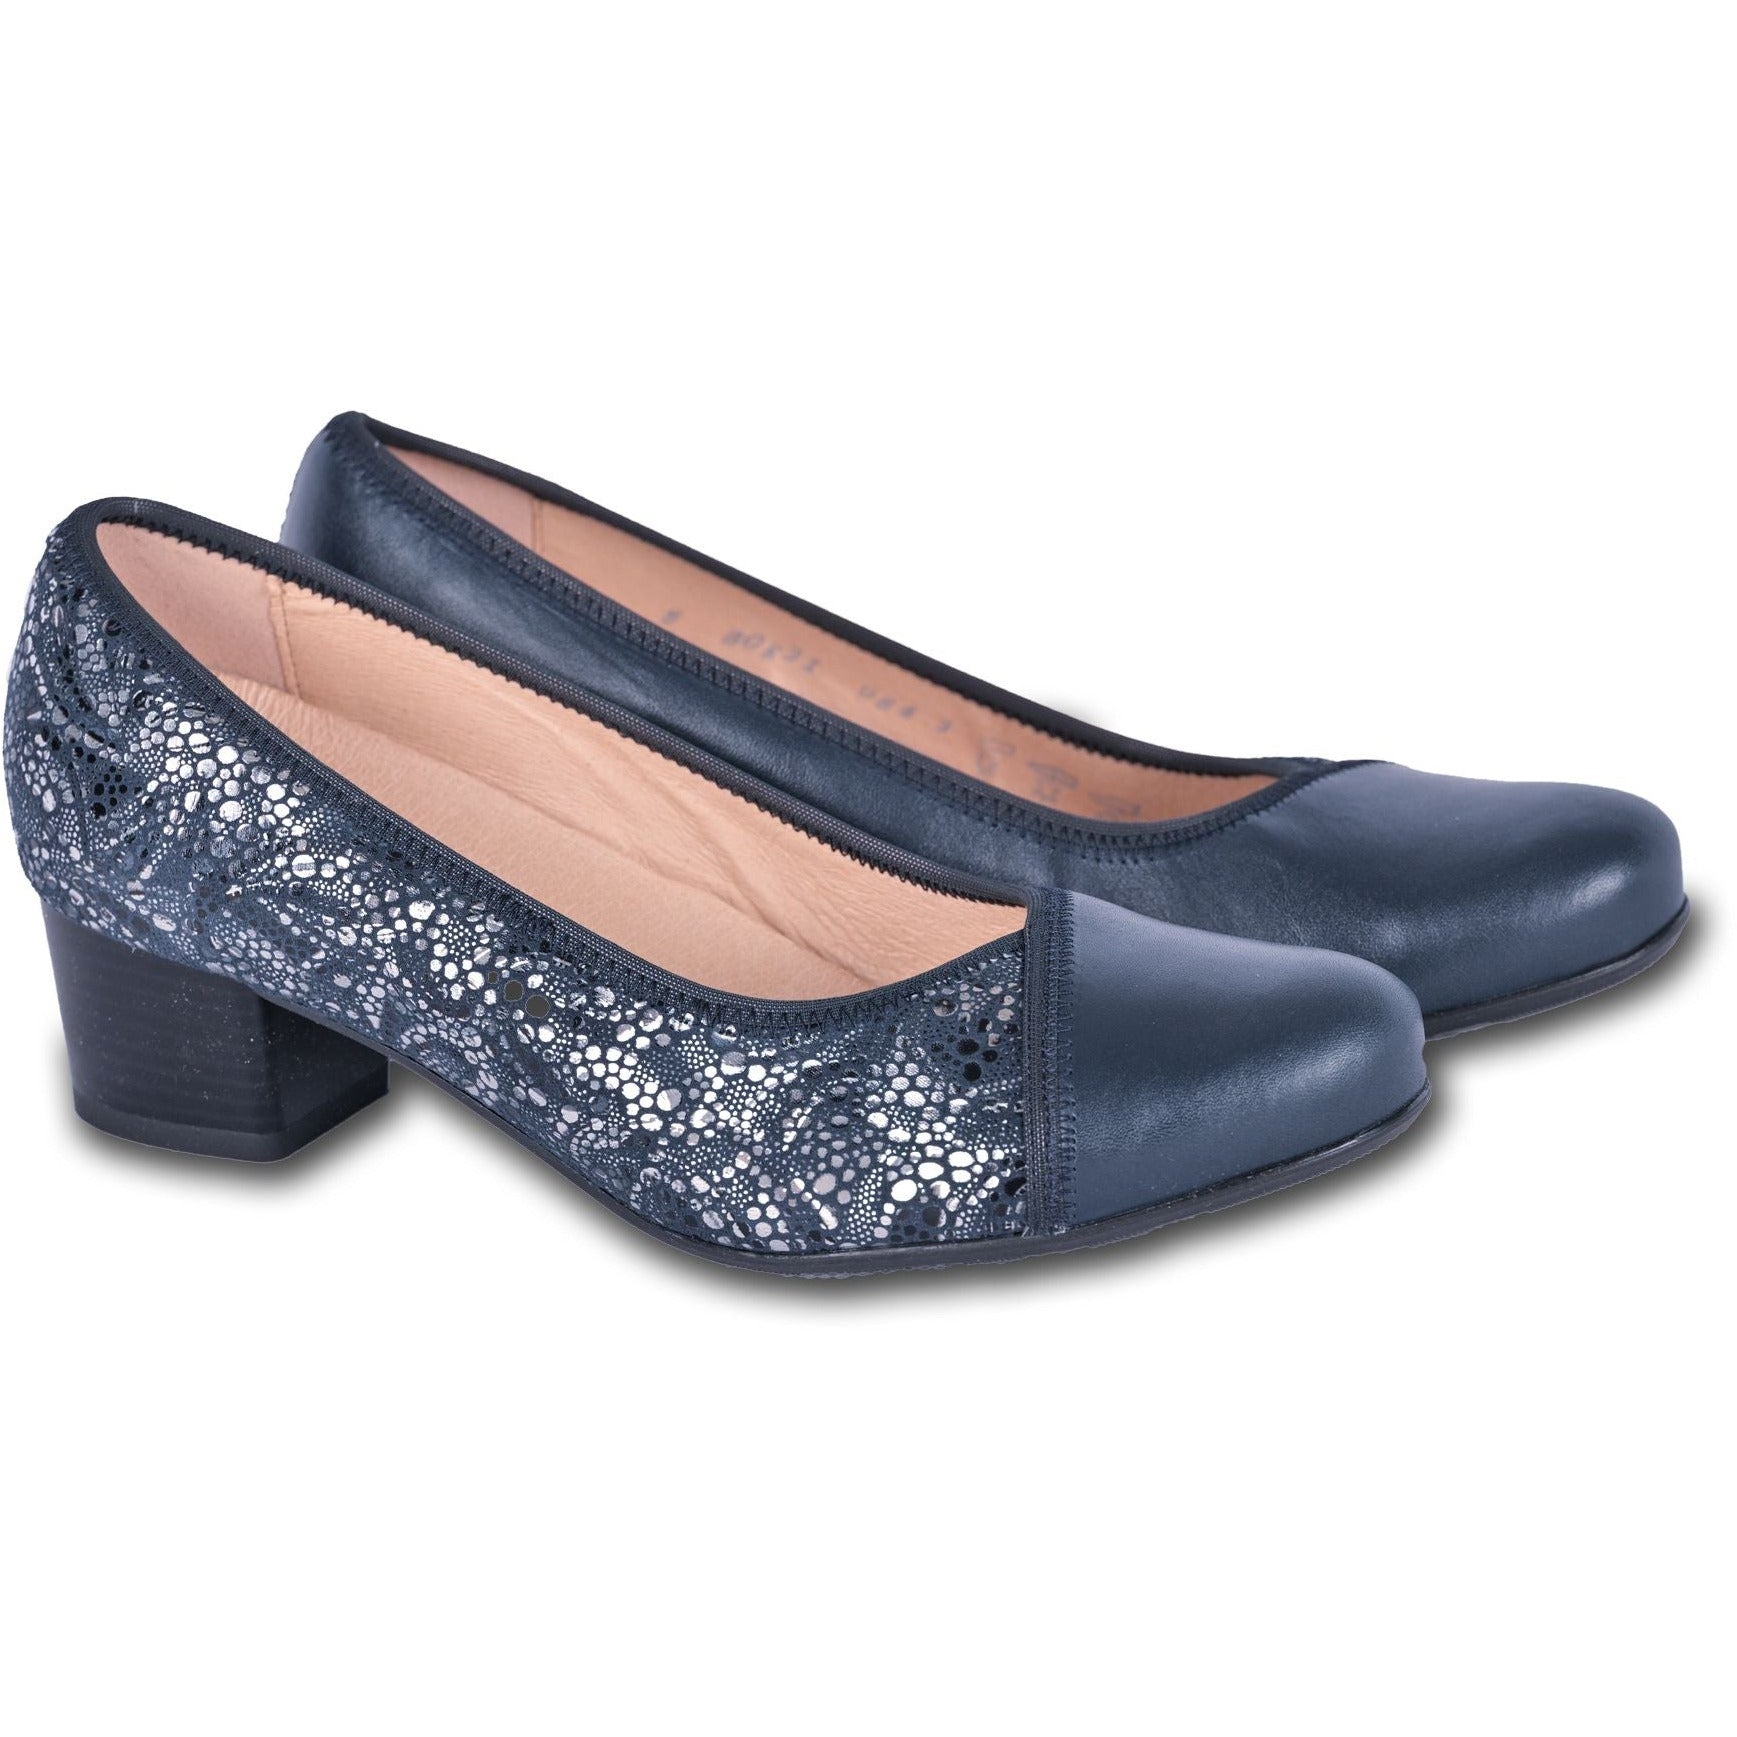 The decorative side with a silver pattern give the shoes a festive and elegant look.